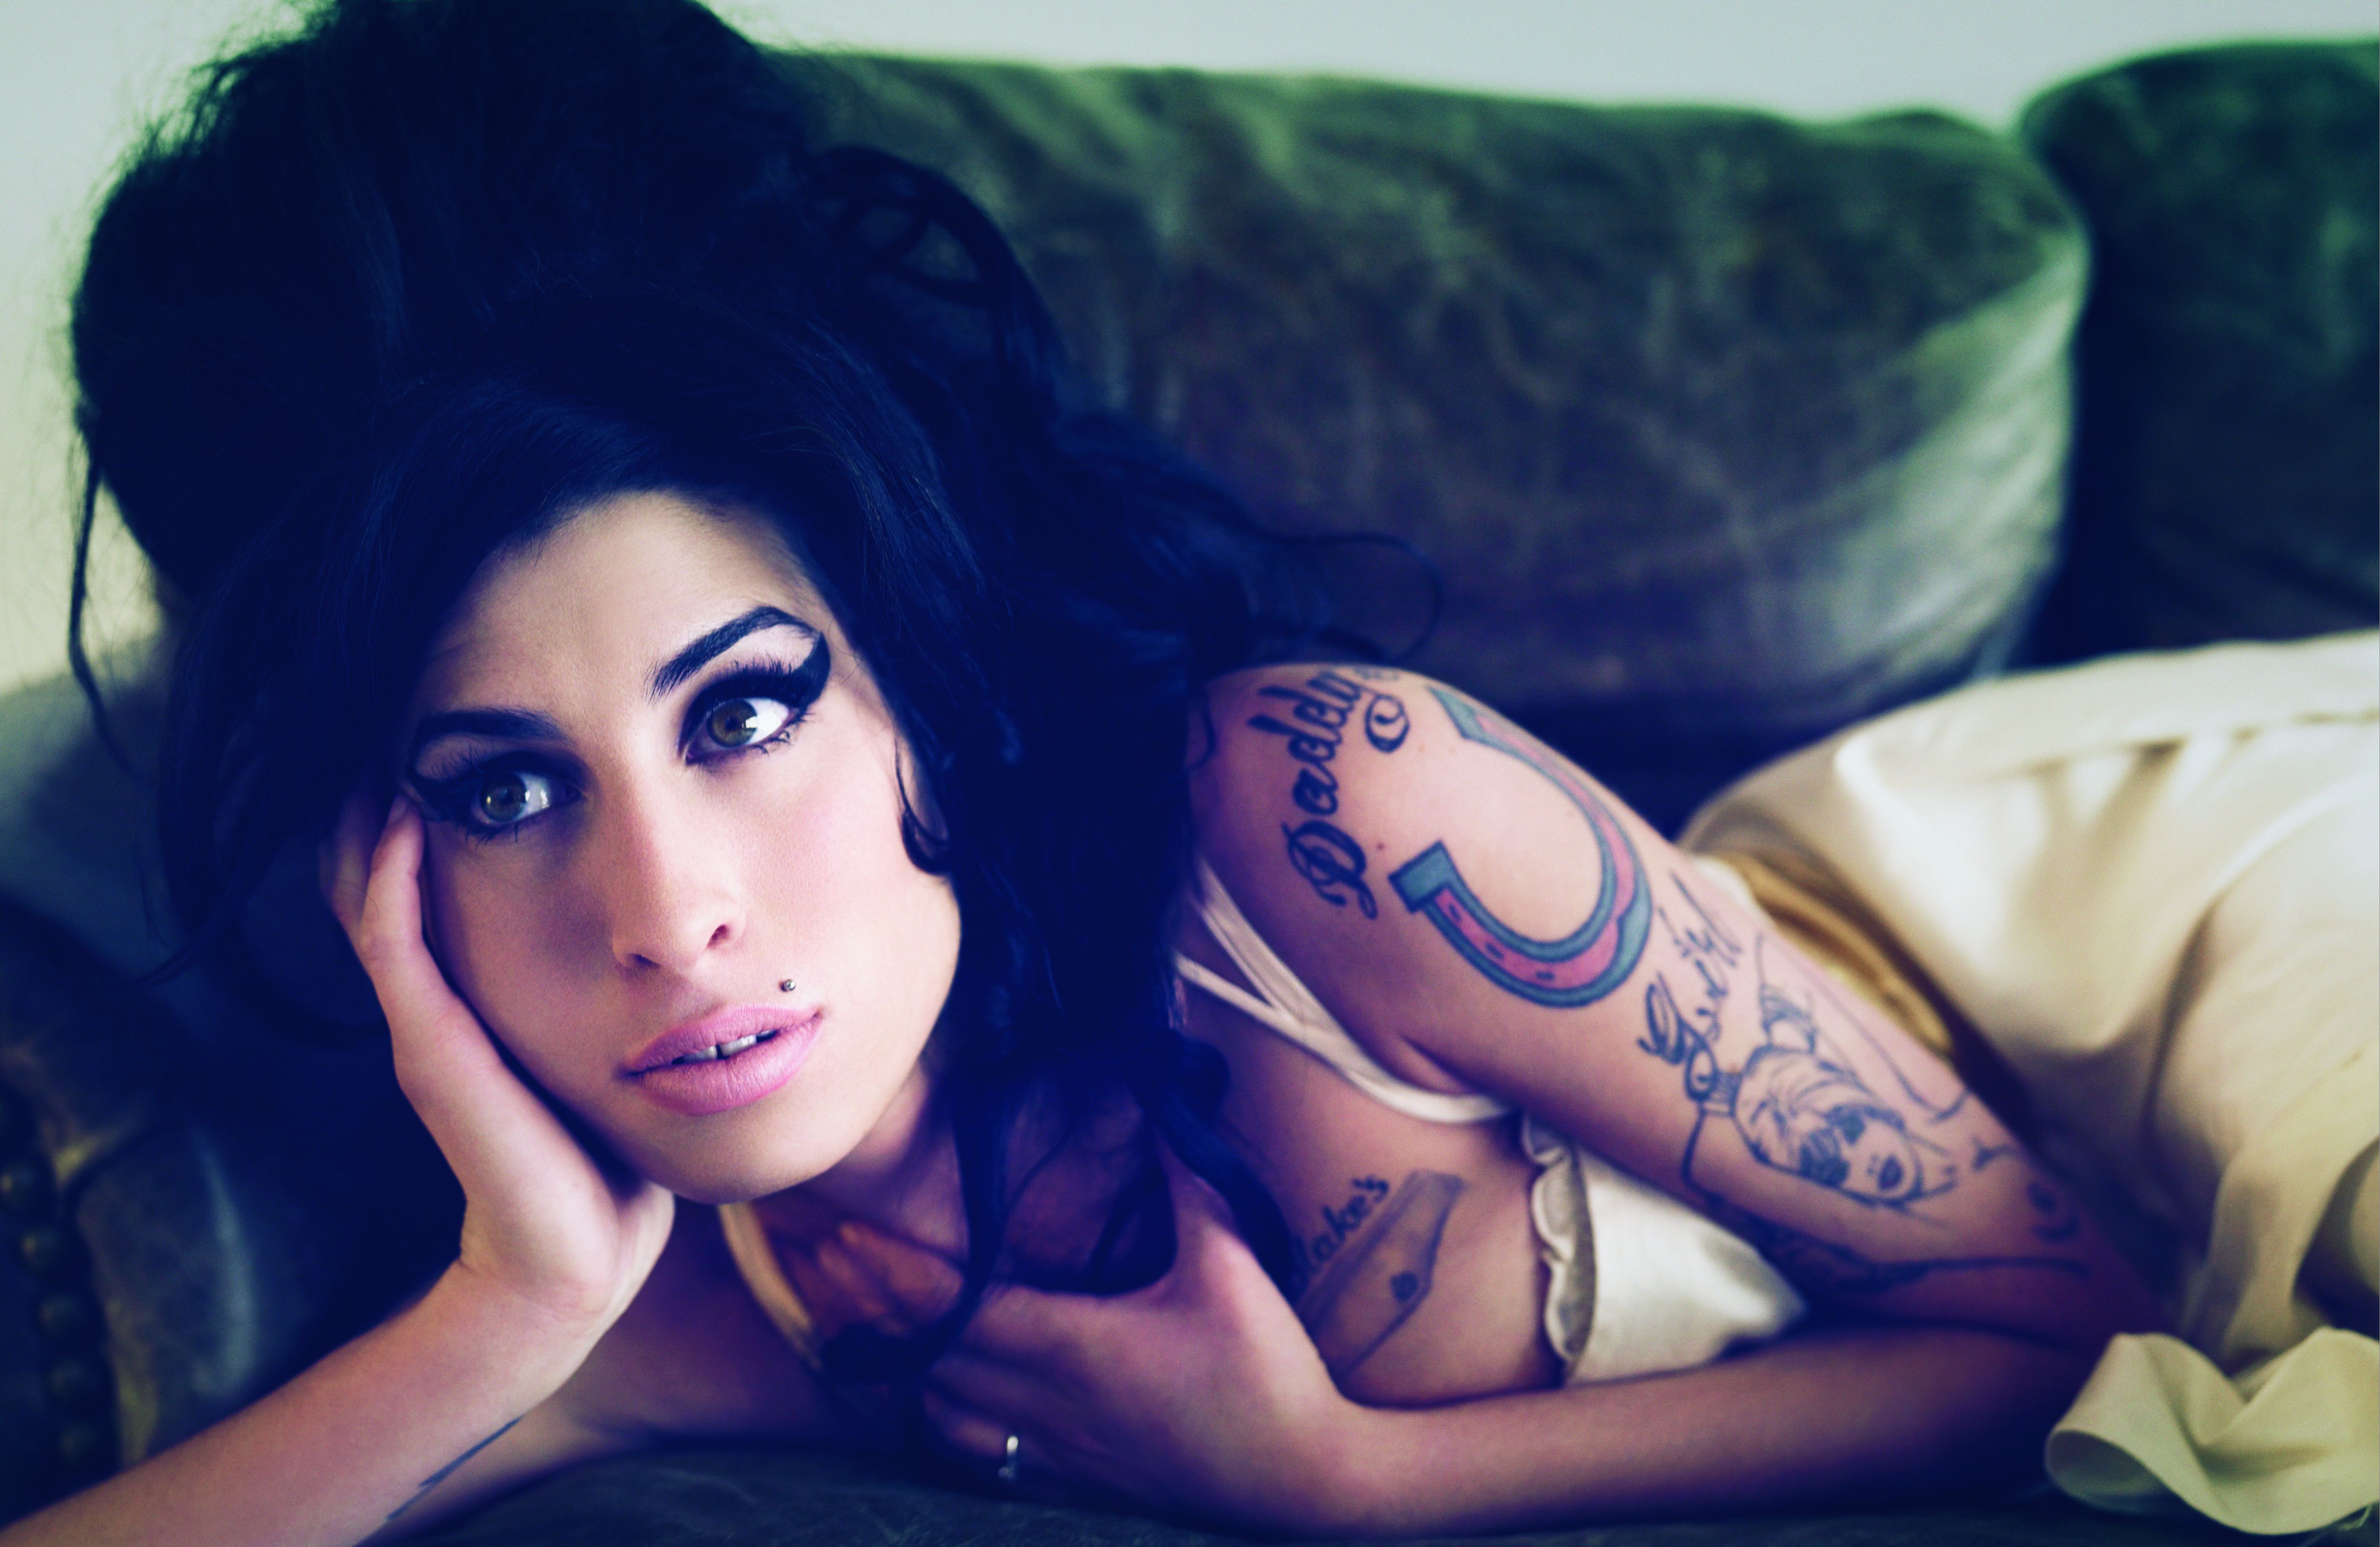 Amy only released two albums in her lifetime, her acclaimed debut Frank in 2003 and the massive Back To Black in 2006